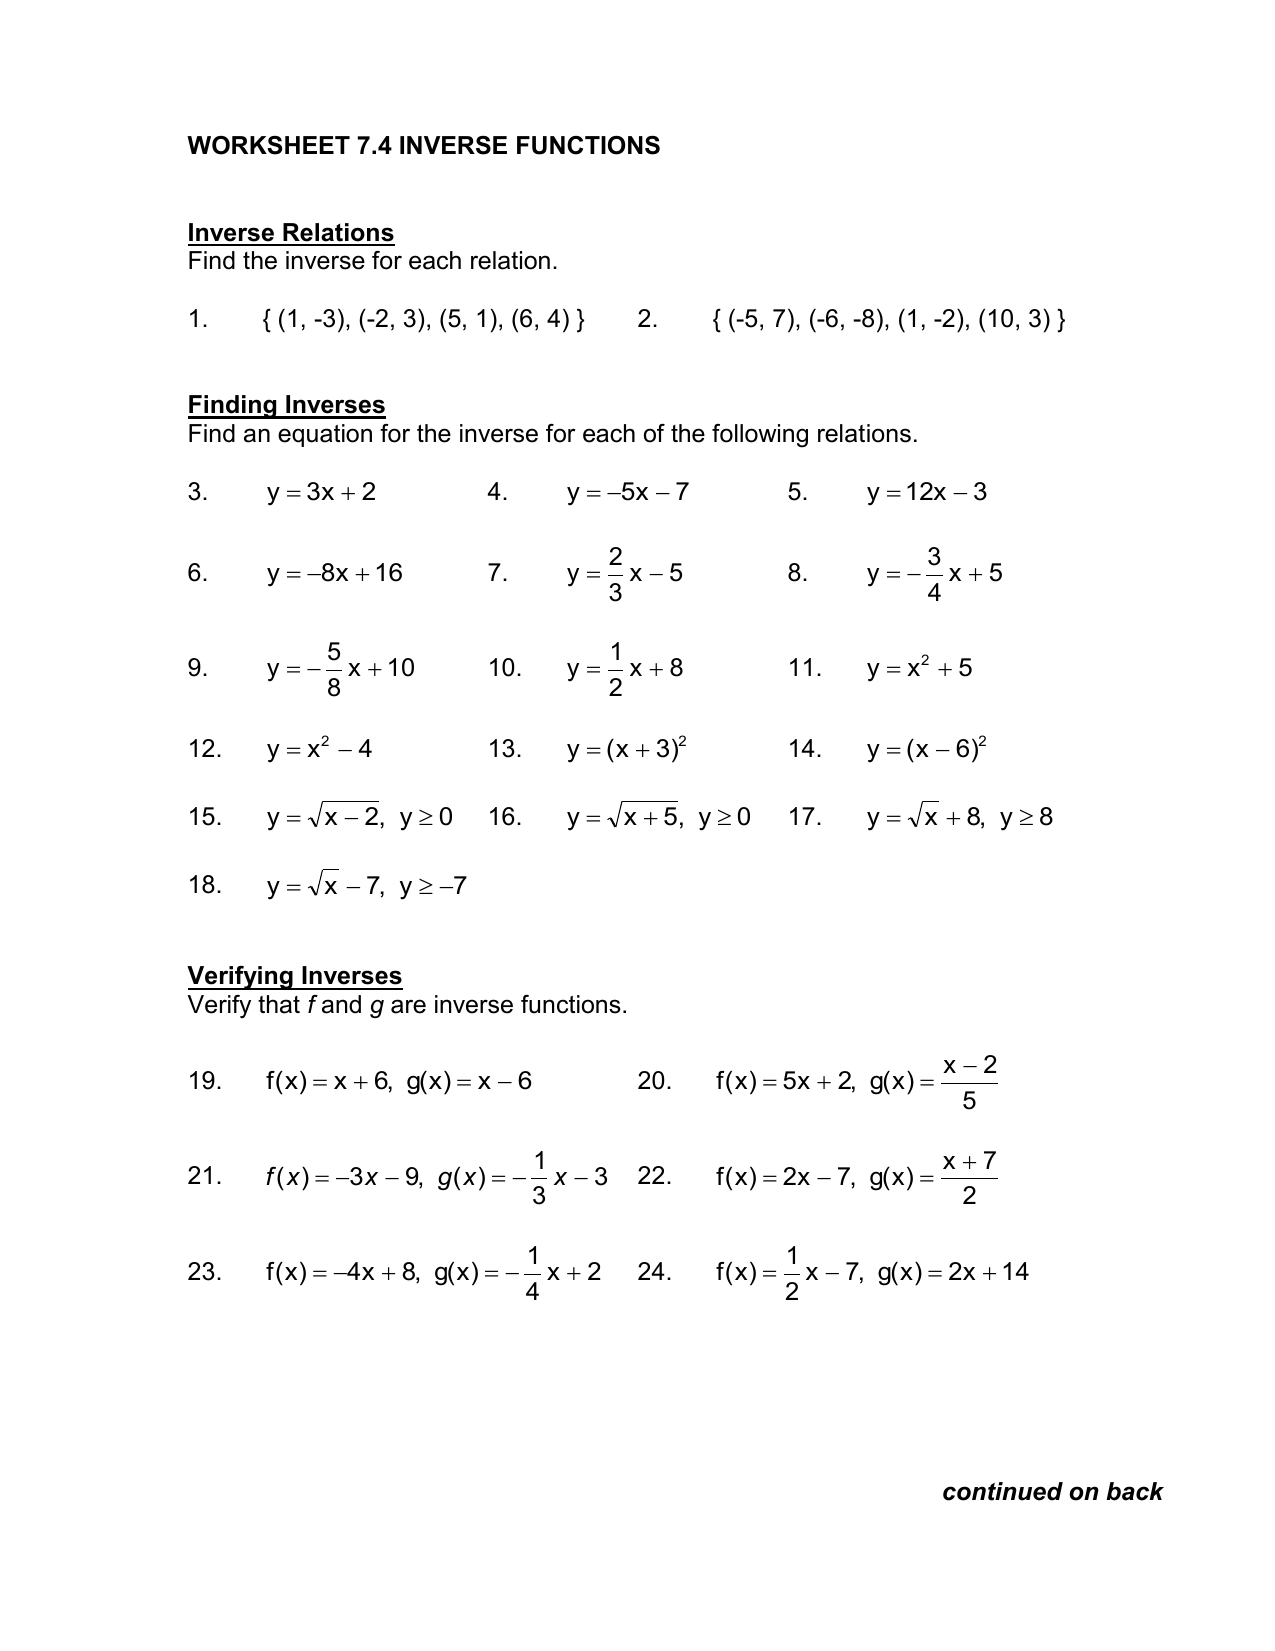 worksheet 21 21 inverse functions Within Graphing Inverse Functions Worksheet